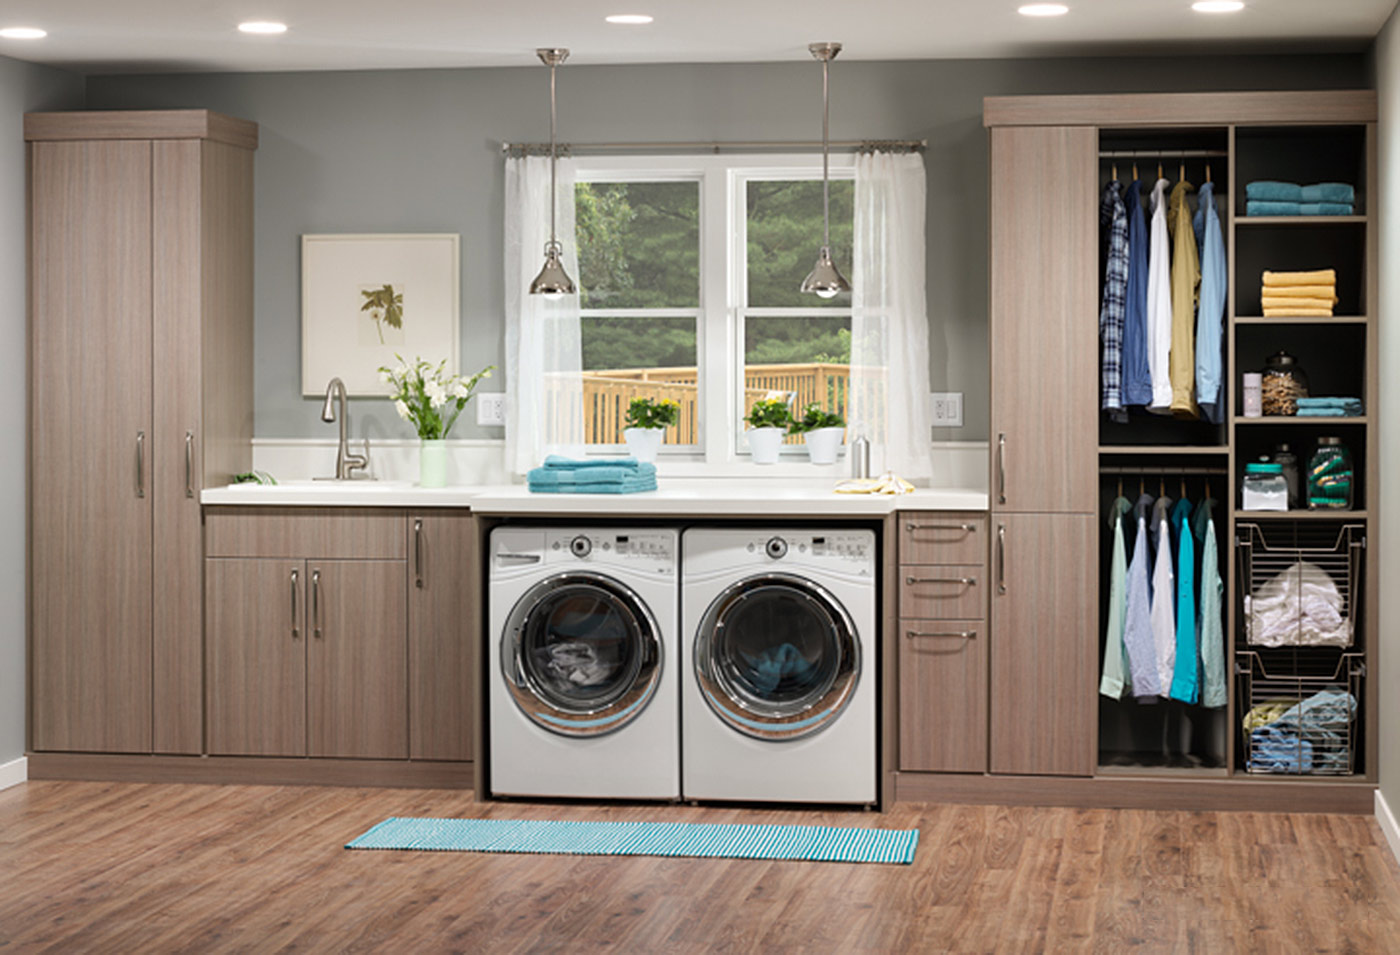 6 Get creative in a small laundry room